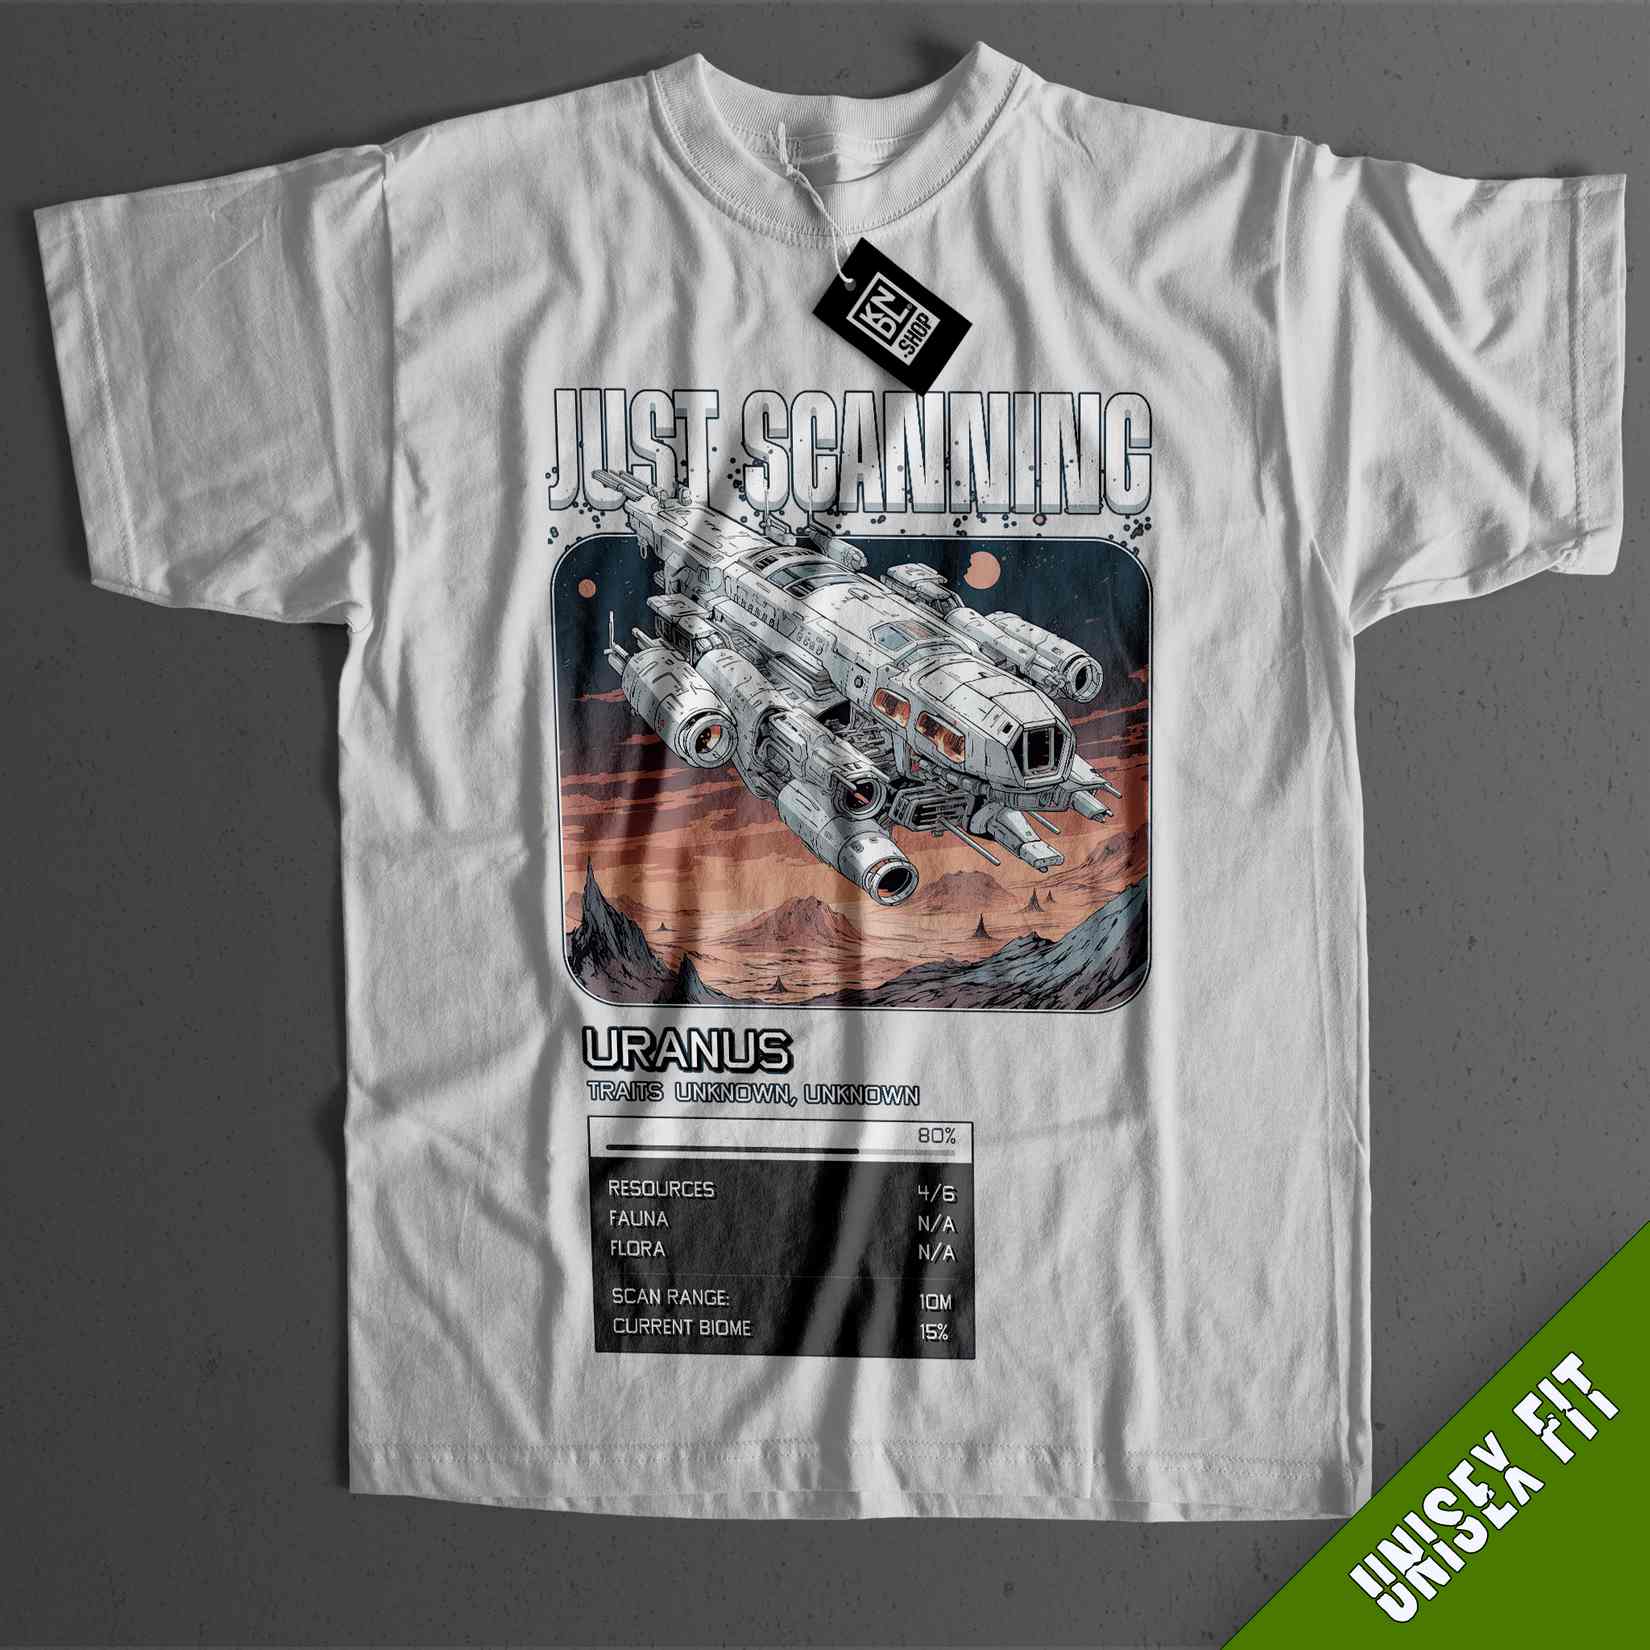 a white t - shirt with a space shuttle on it